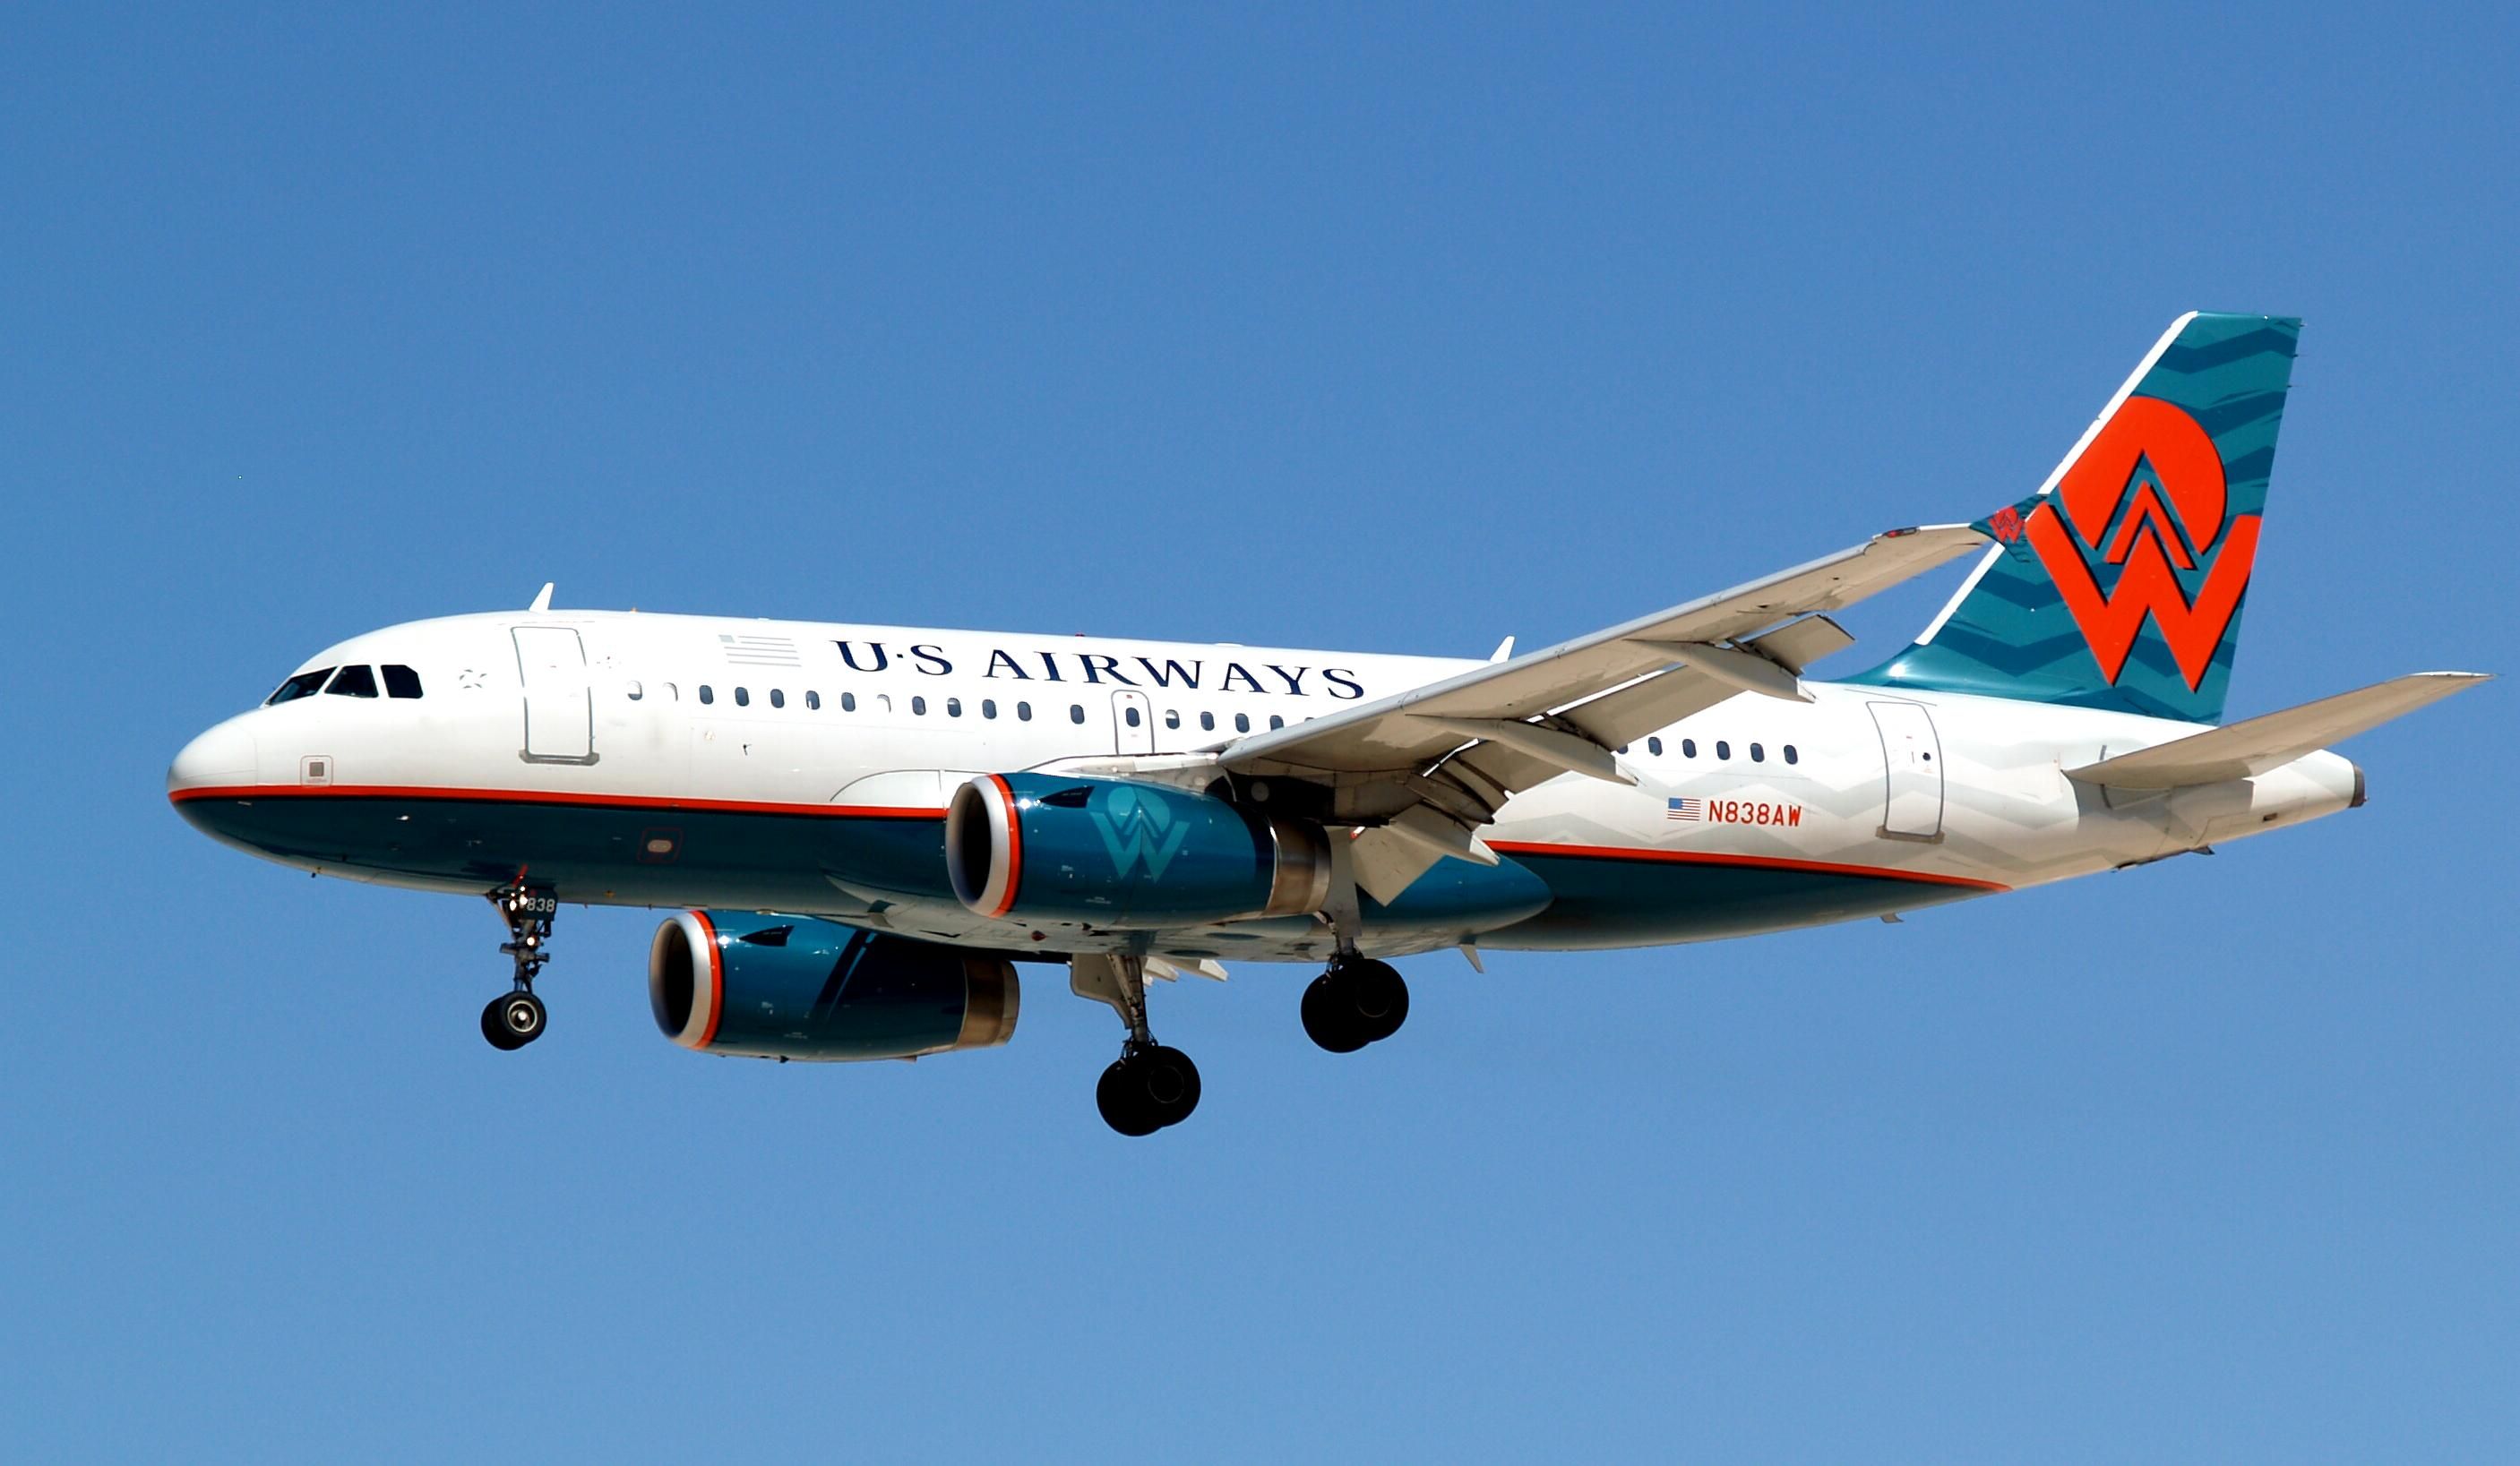 A US Airways A319 flying in the sky.